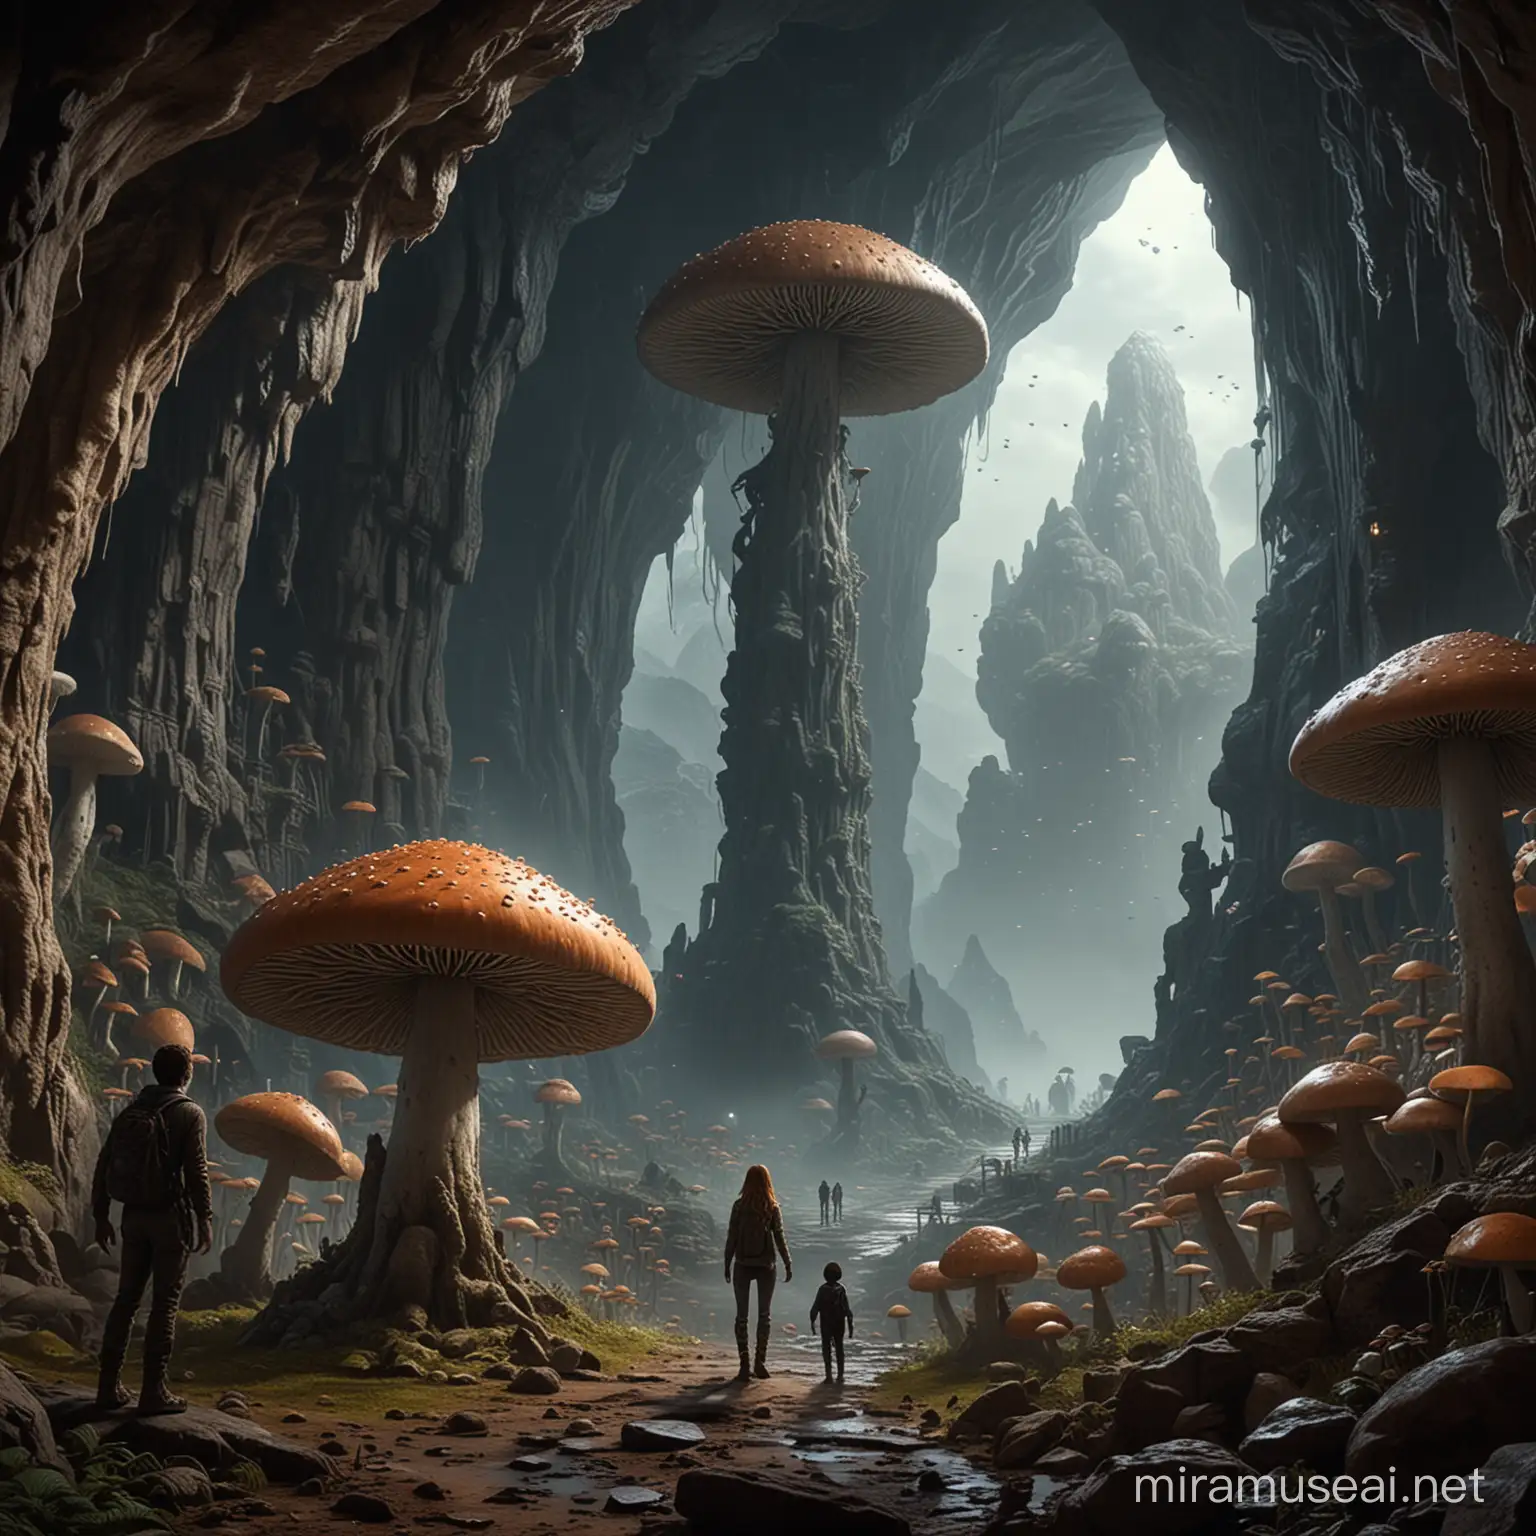 Man meets beautiful mushroom-like woman, who is the size of a mountain, in the foreground in a dark and cavernous underground mushroom city, bustling with strange, mushroom-like humanoid figures, In the foreground a human stands in awe, dwarfed by the alien-mushroom architecture